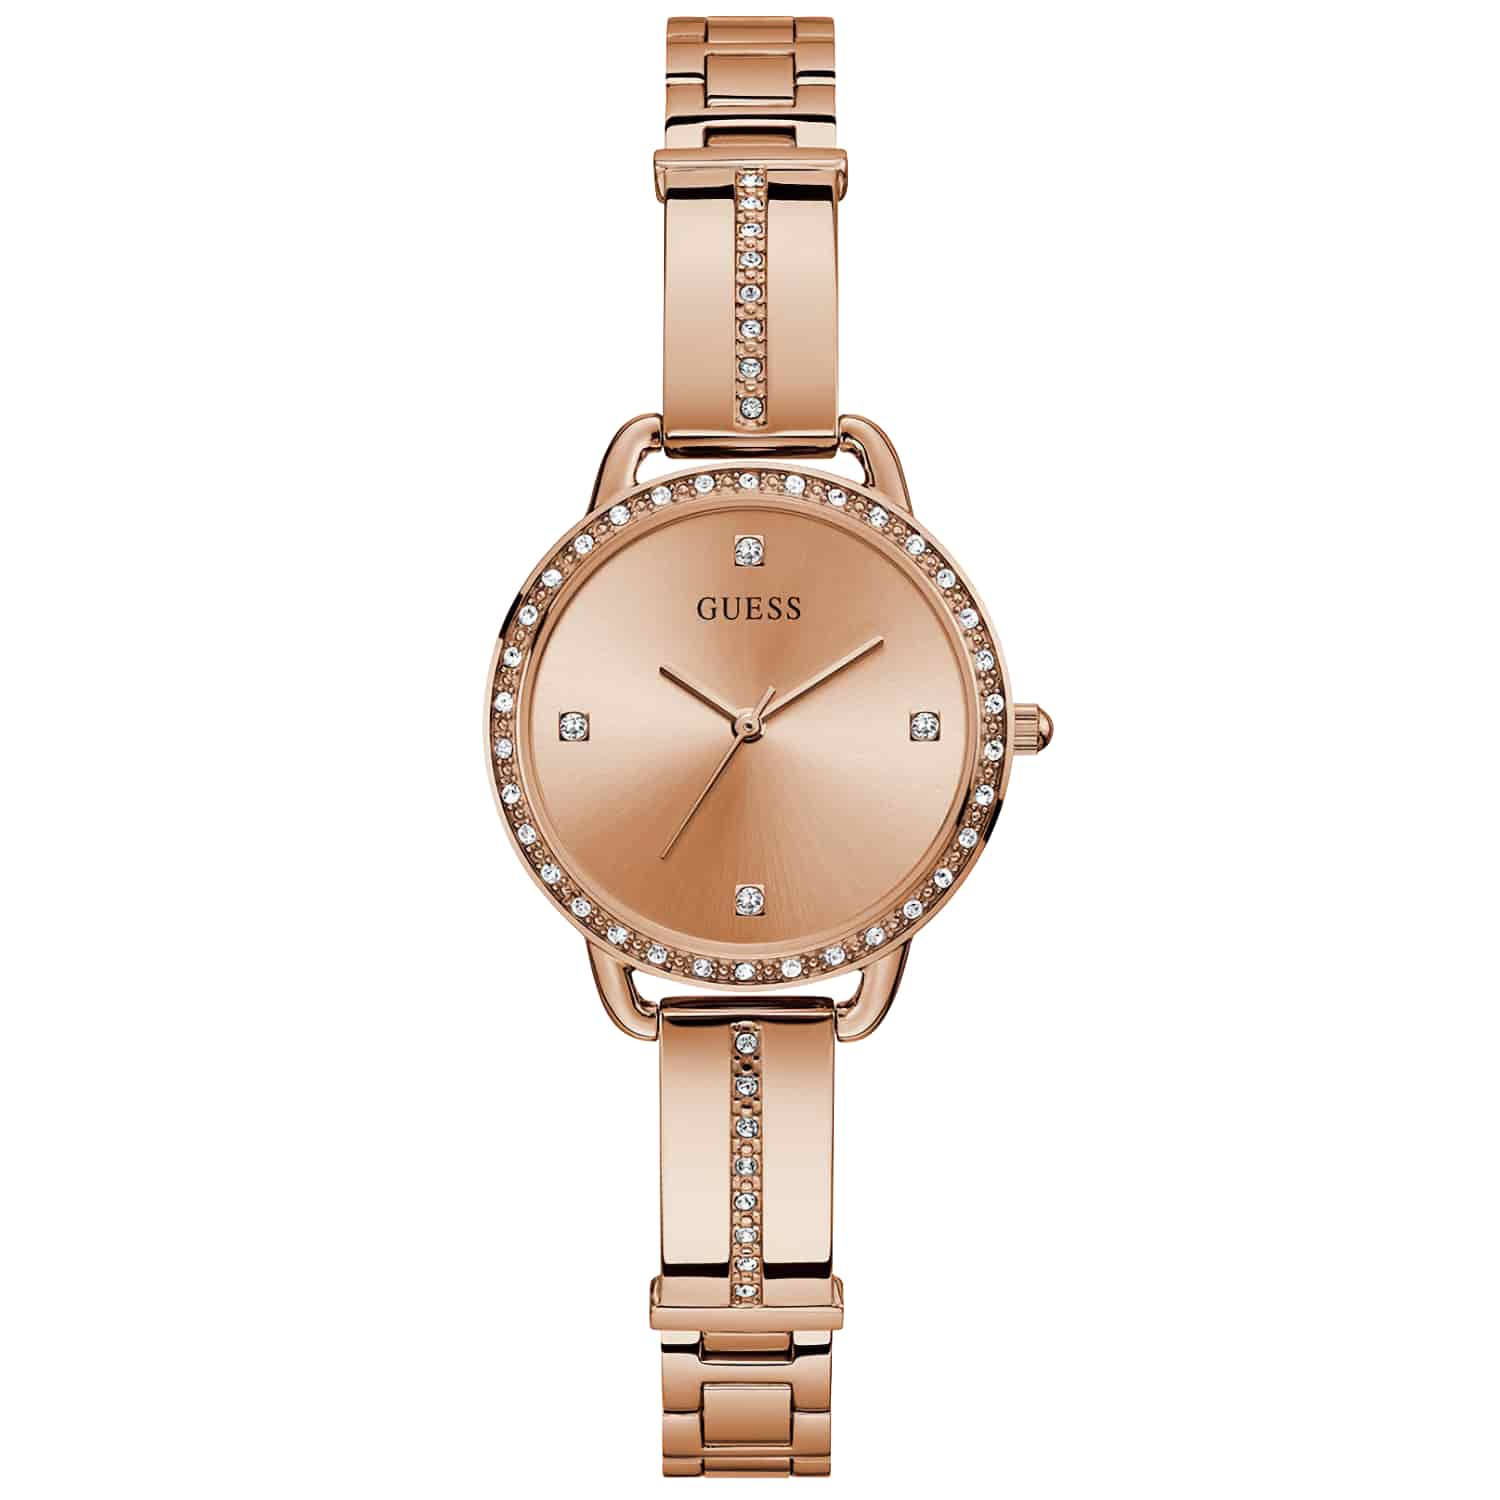 GW0022L3 GUESS Rose Gold Tone Watch. A touch of sparkle on this dressy bangle featuring crystals on the case, bangle and dial. This timepiece is perfect to layer with your favourite bracelets or worn alone. Oxipay is simply the easier way to pay - use Oxi